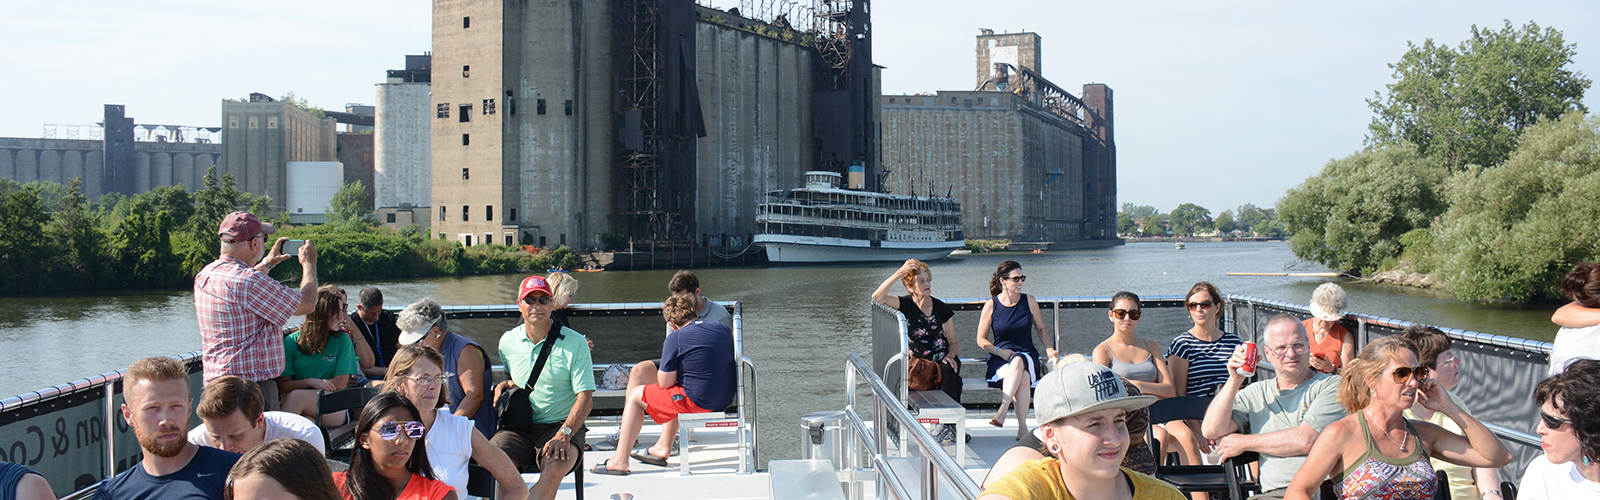 Buffalo River History Tours passengers learn about the SS Columbia, which is docked in the Buffalo River next to the historic grain elevators at Silo City.